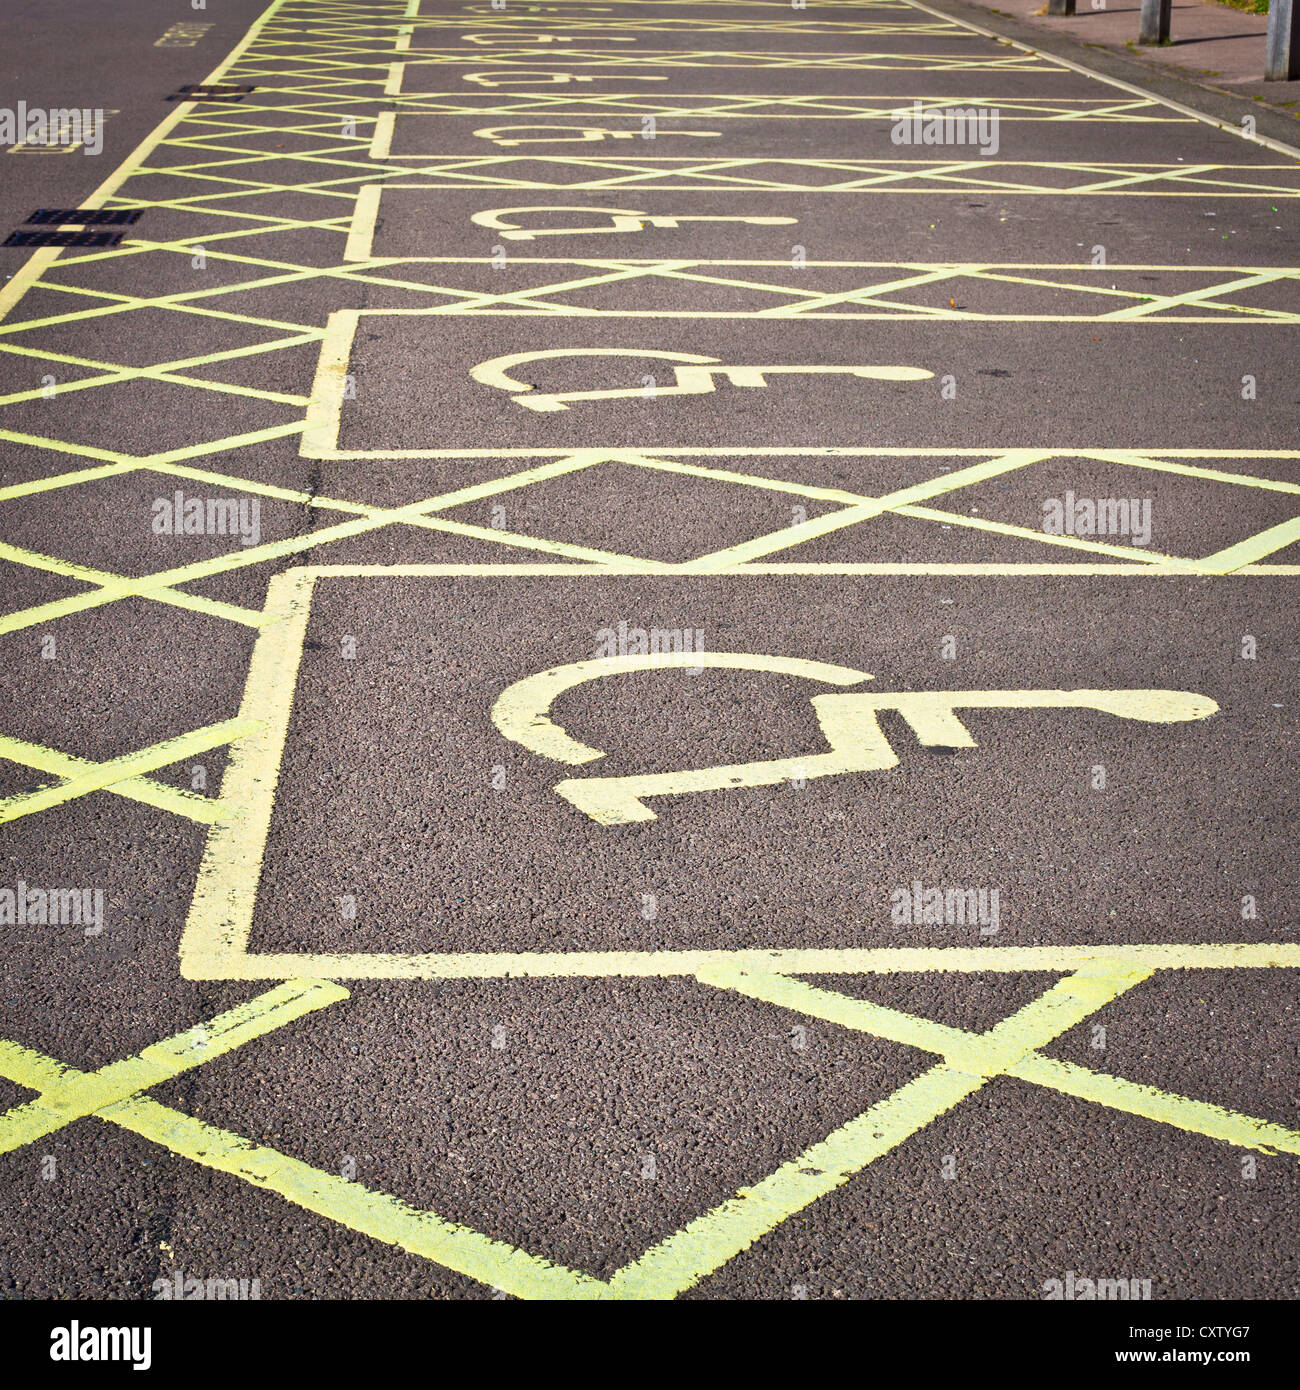 Row of empty disabled parking spaces in a parking lot Stock Photo